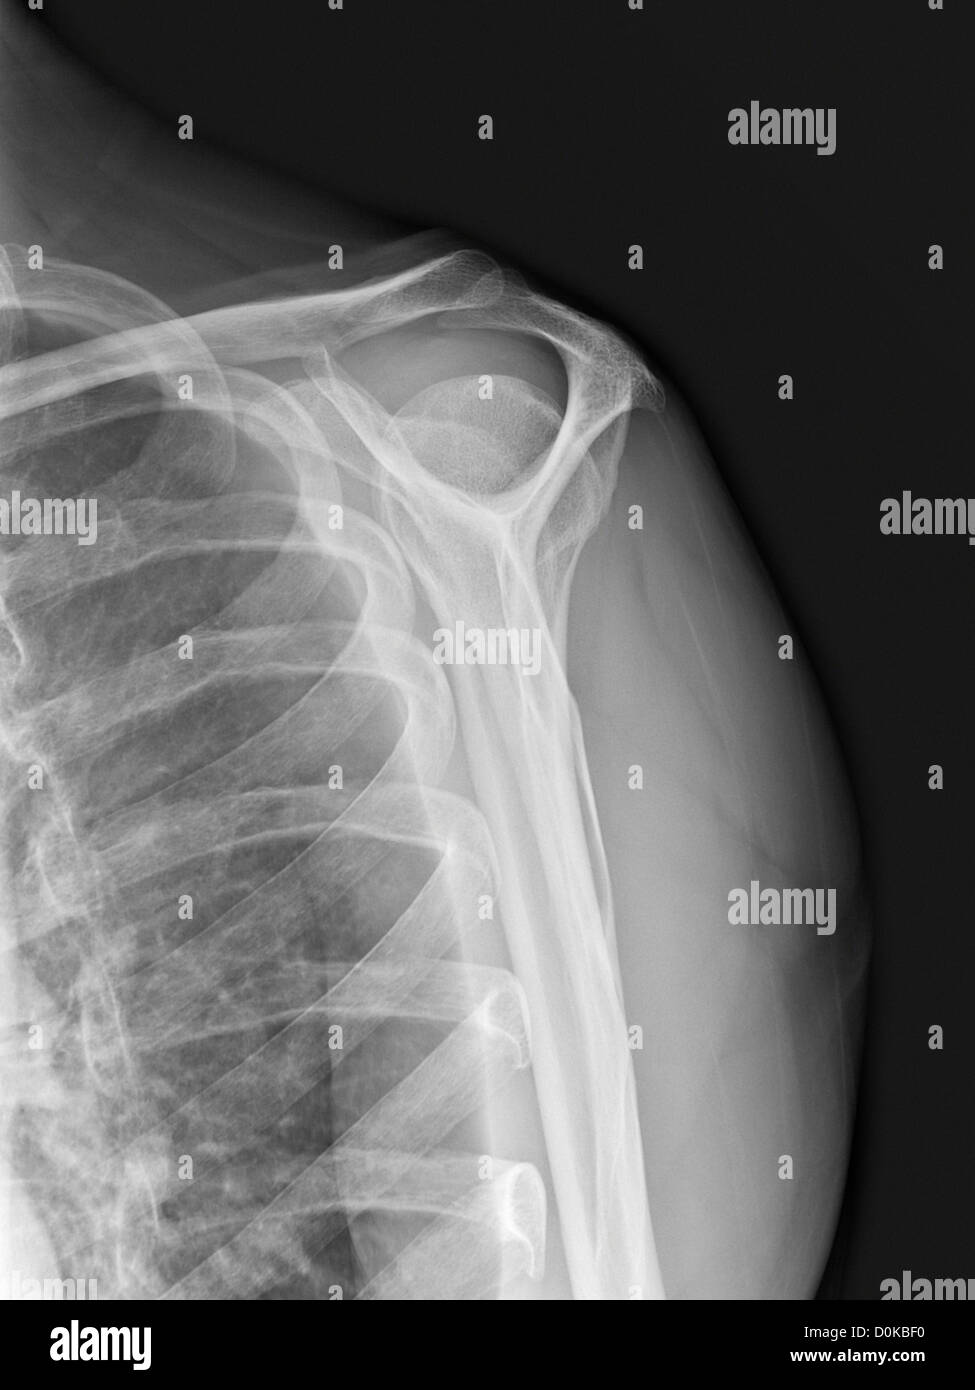 An x-ray human shoulder front showing humerus (the upper arm bone) shoulder blade or scapula collarbone or clavicle rib cage. Stock Photo